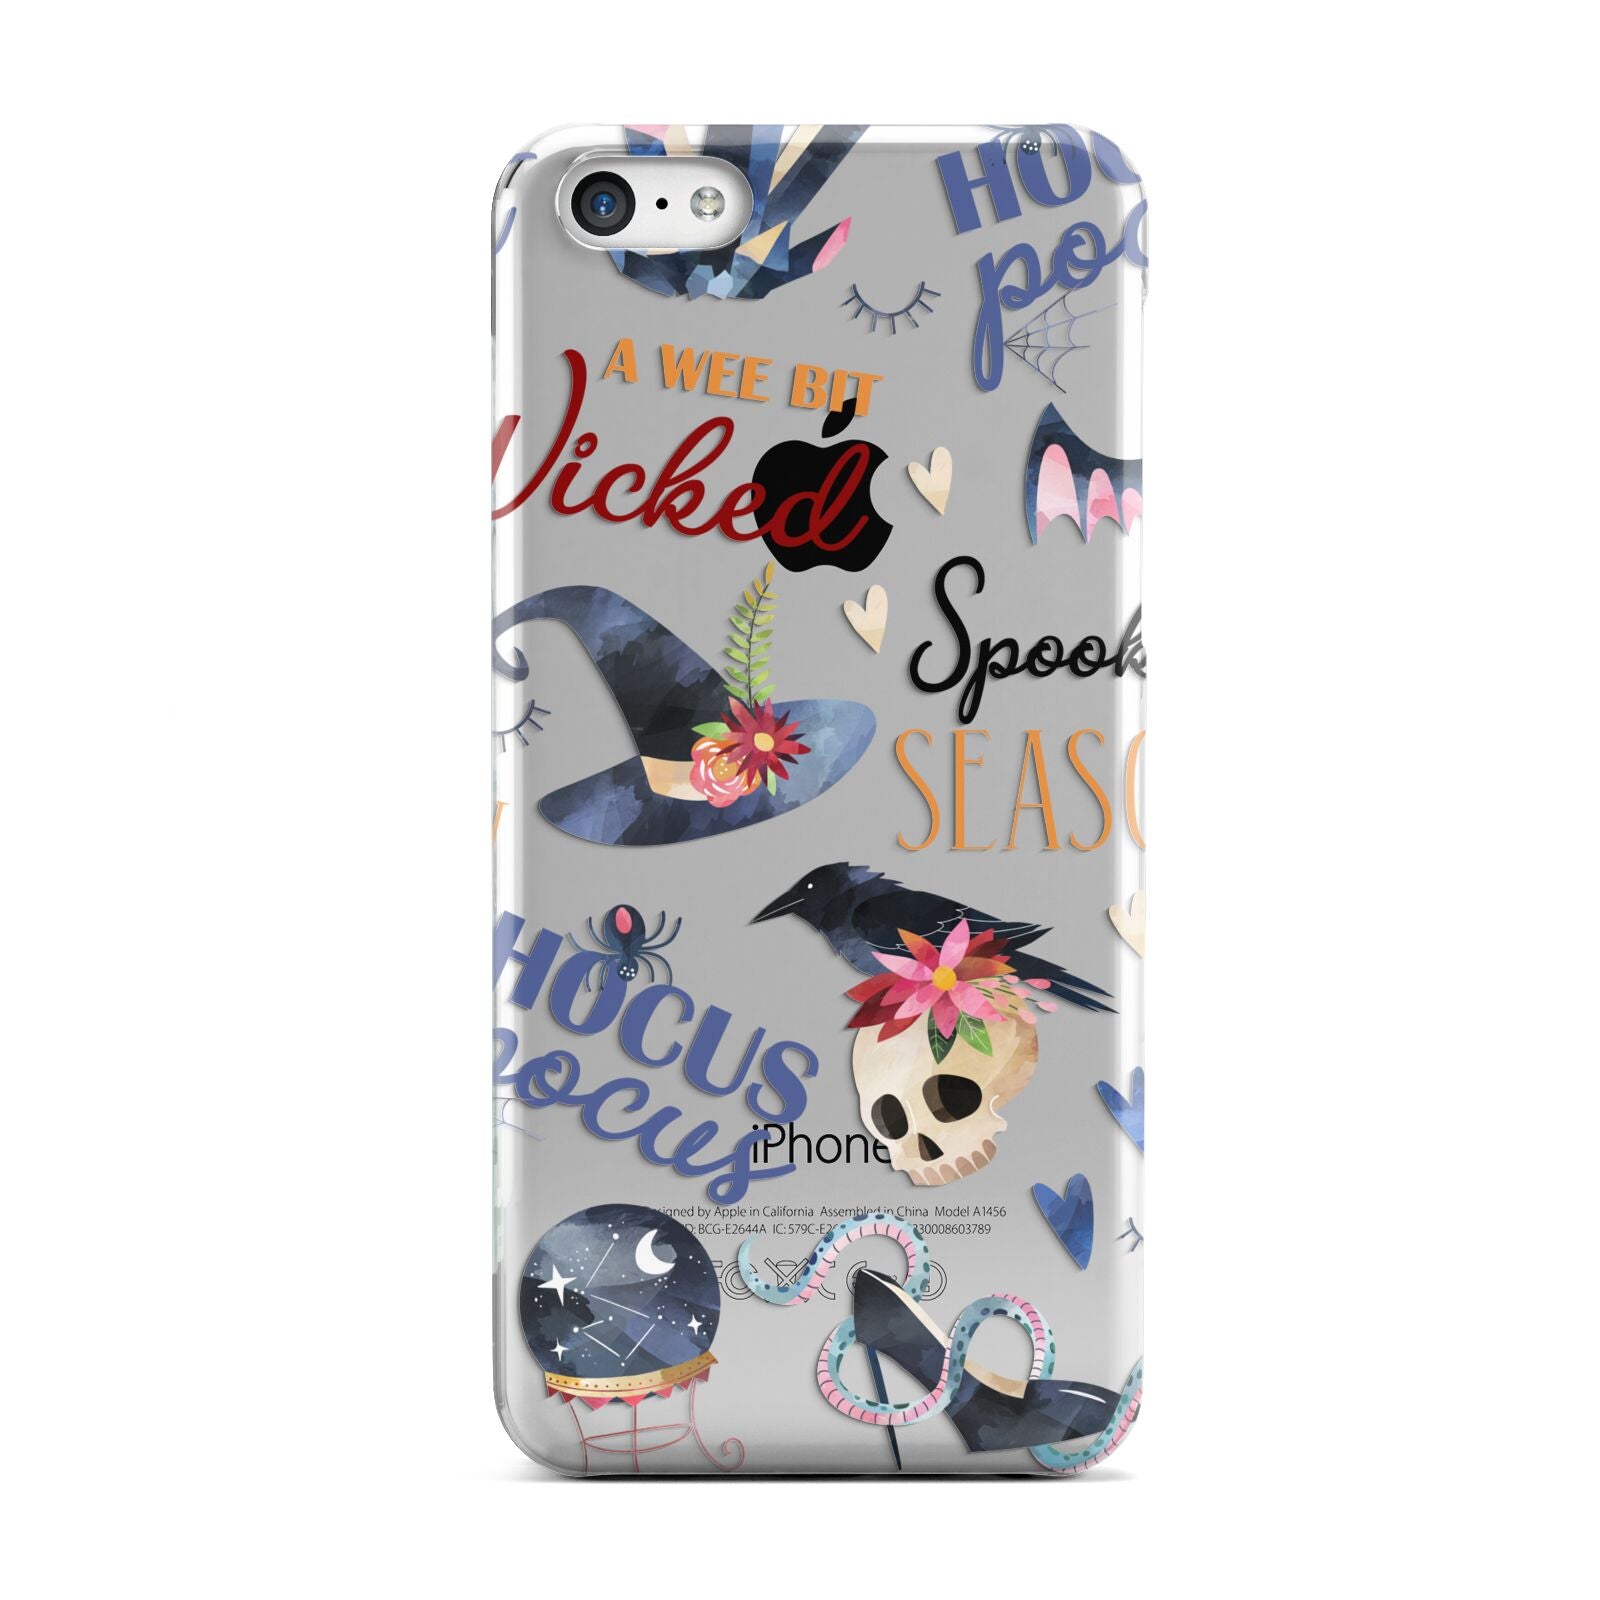 Fun Halloween Catchphrases and Watercolour Illustrations Apple iPhone 5c Case